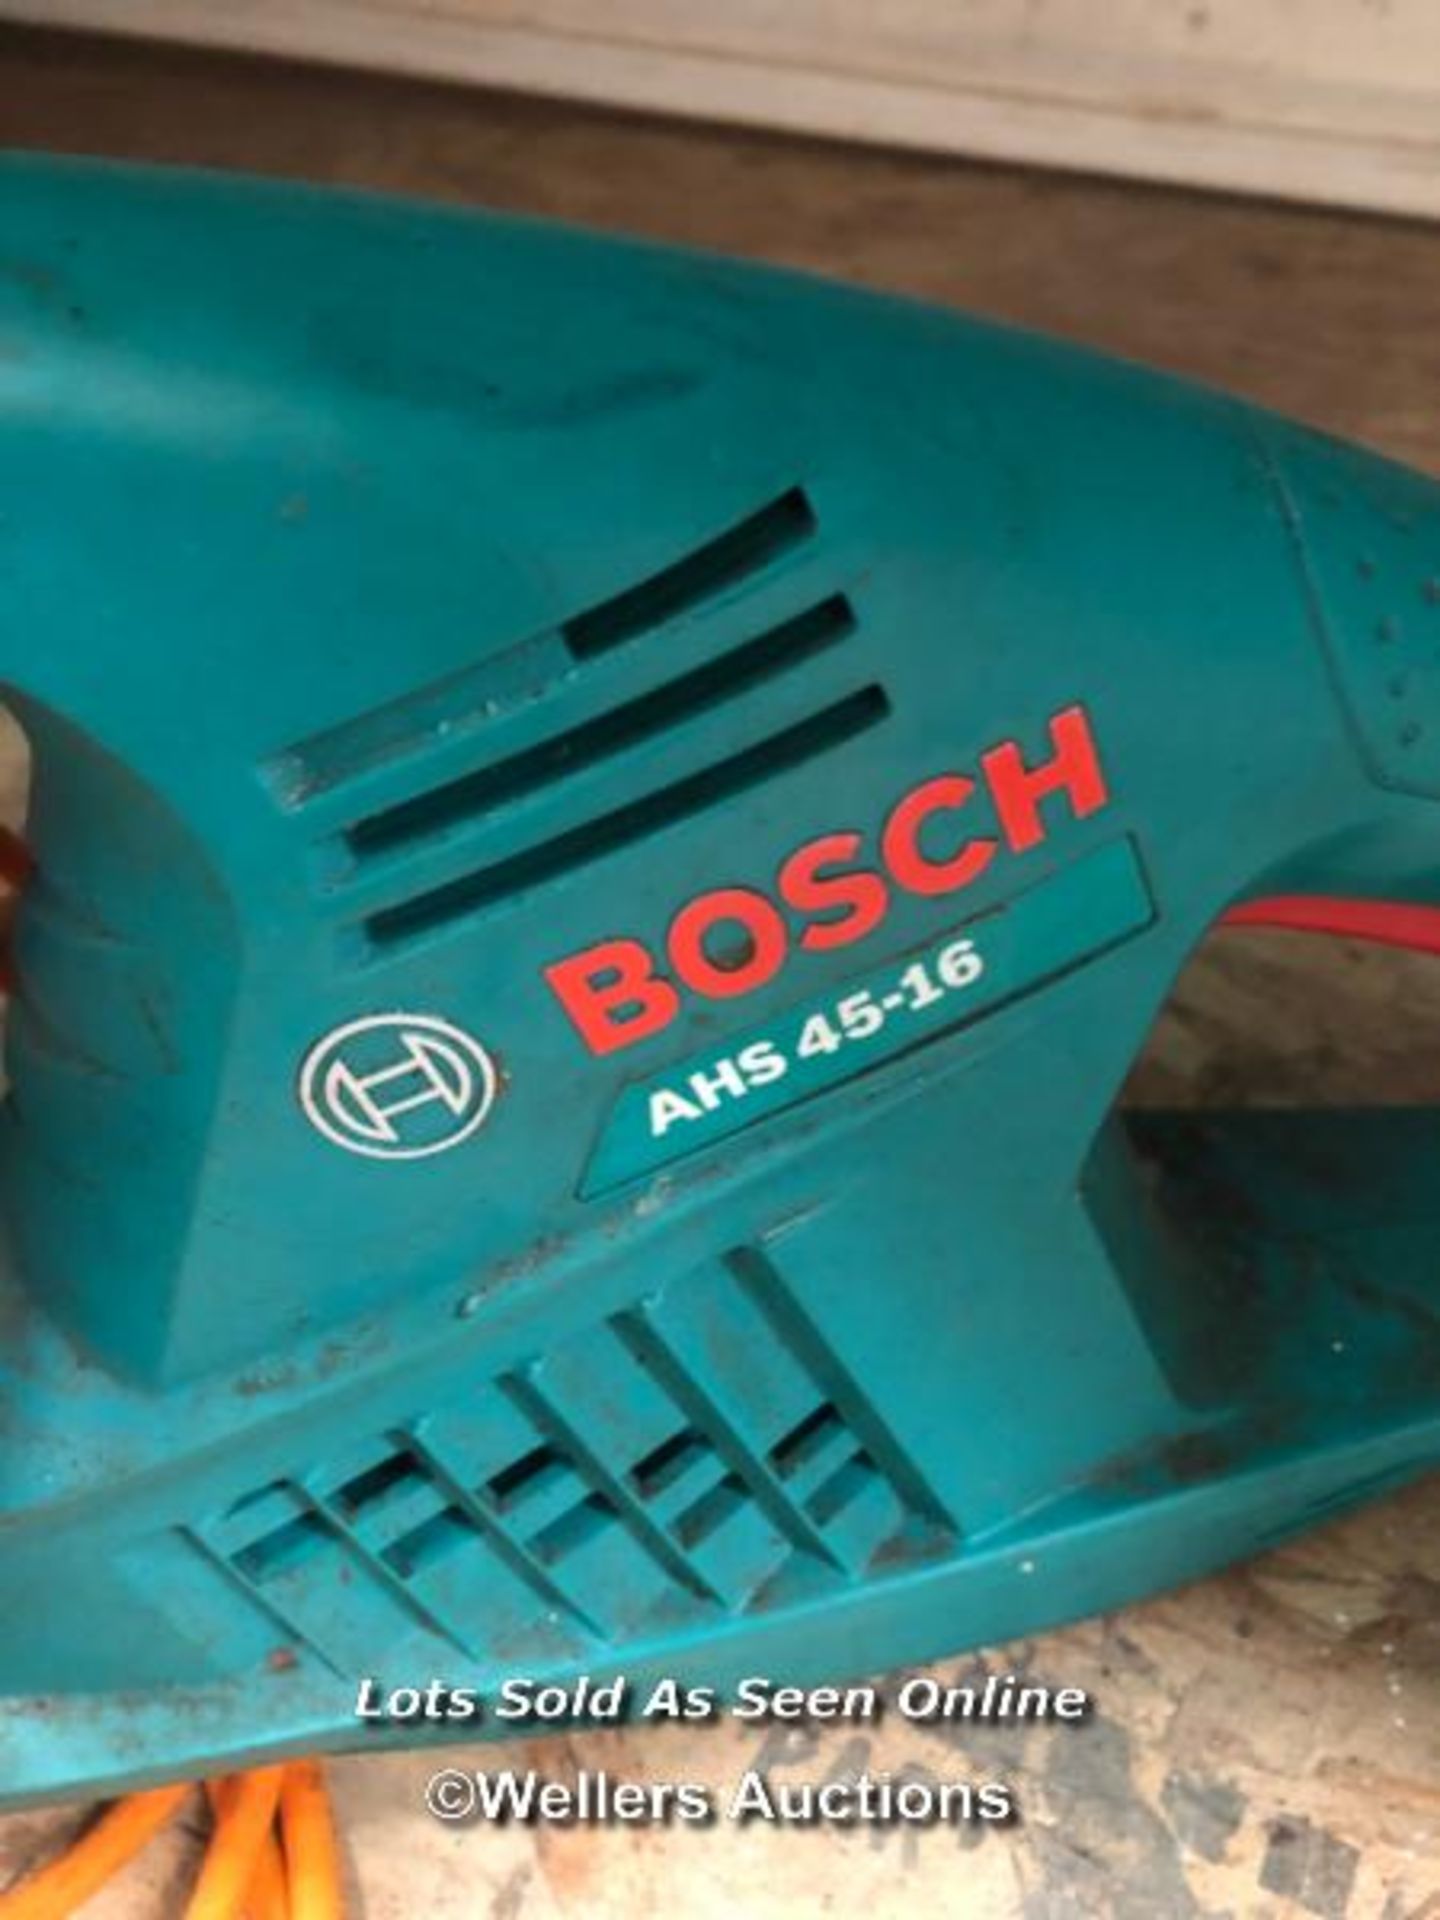 BOSCH AHS 45-16 ELECTRIC HEDGE CUTTER - Image 2 of 2